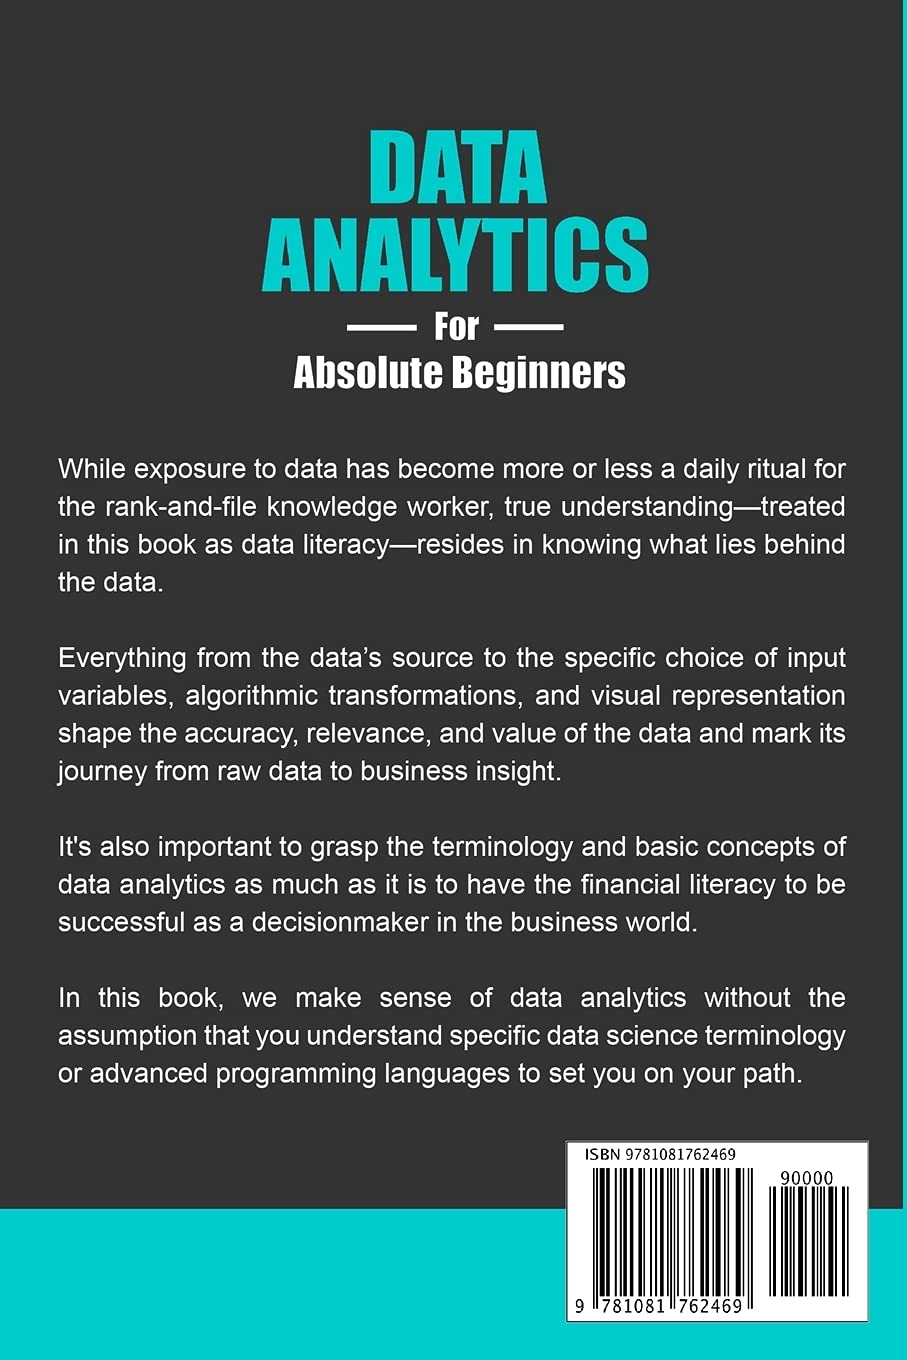 Data Analytics for Absolute Beginners: A Deconstructed Guide to Data Literacy: (Introduction to Data, Data Visualization, Business Intelligence & ... Science, Python & Statistics for Beginners)